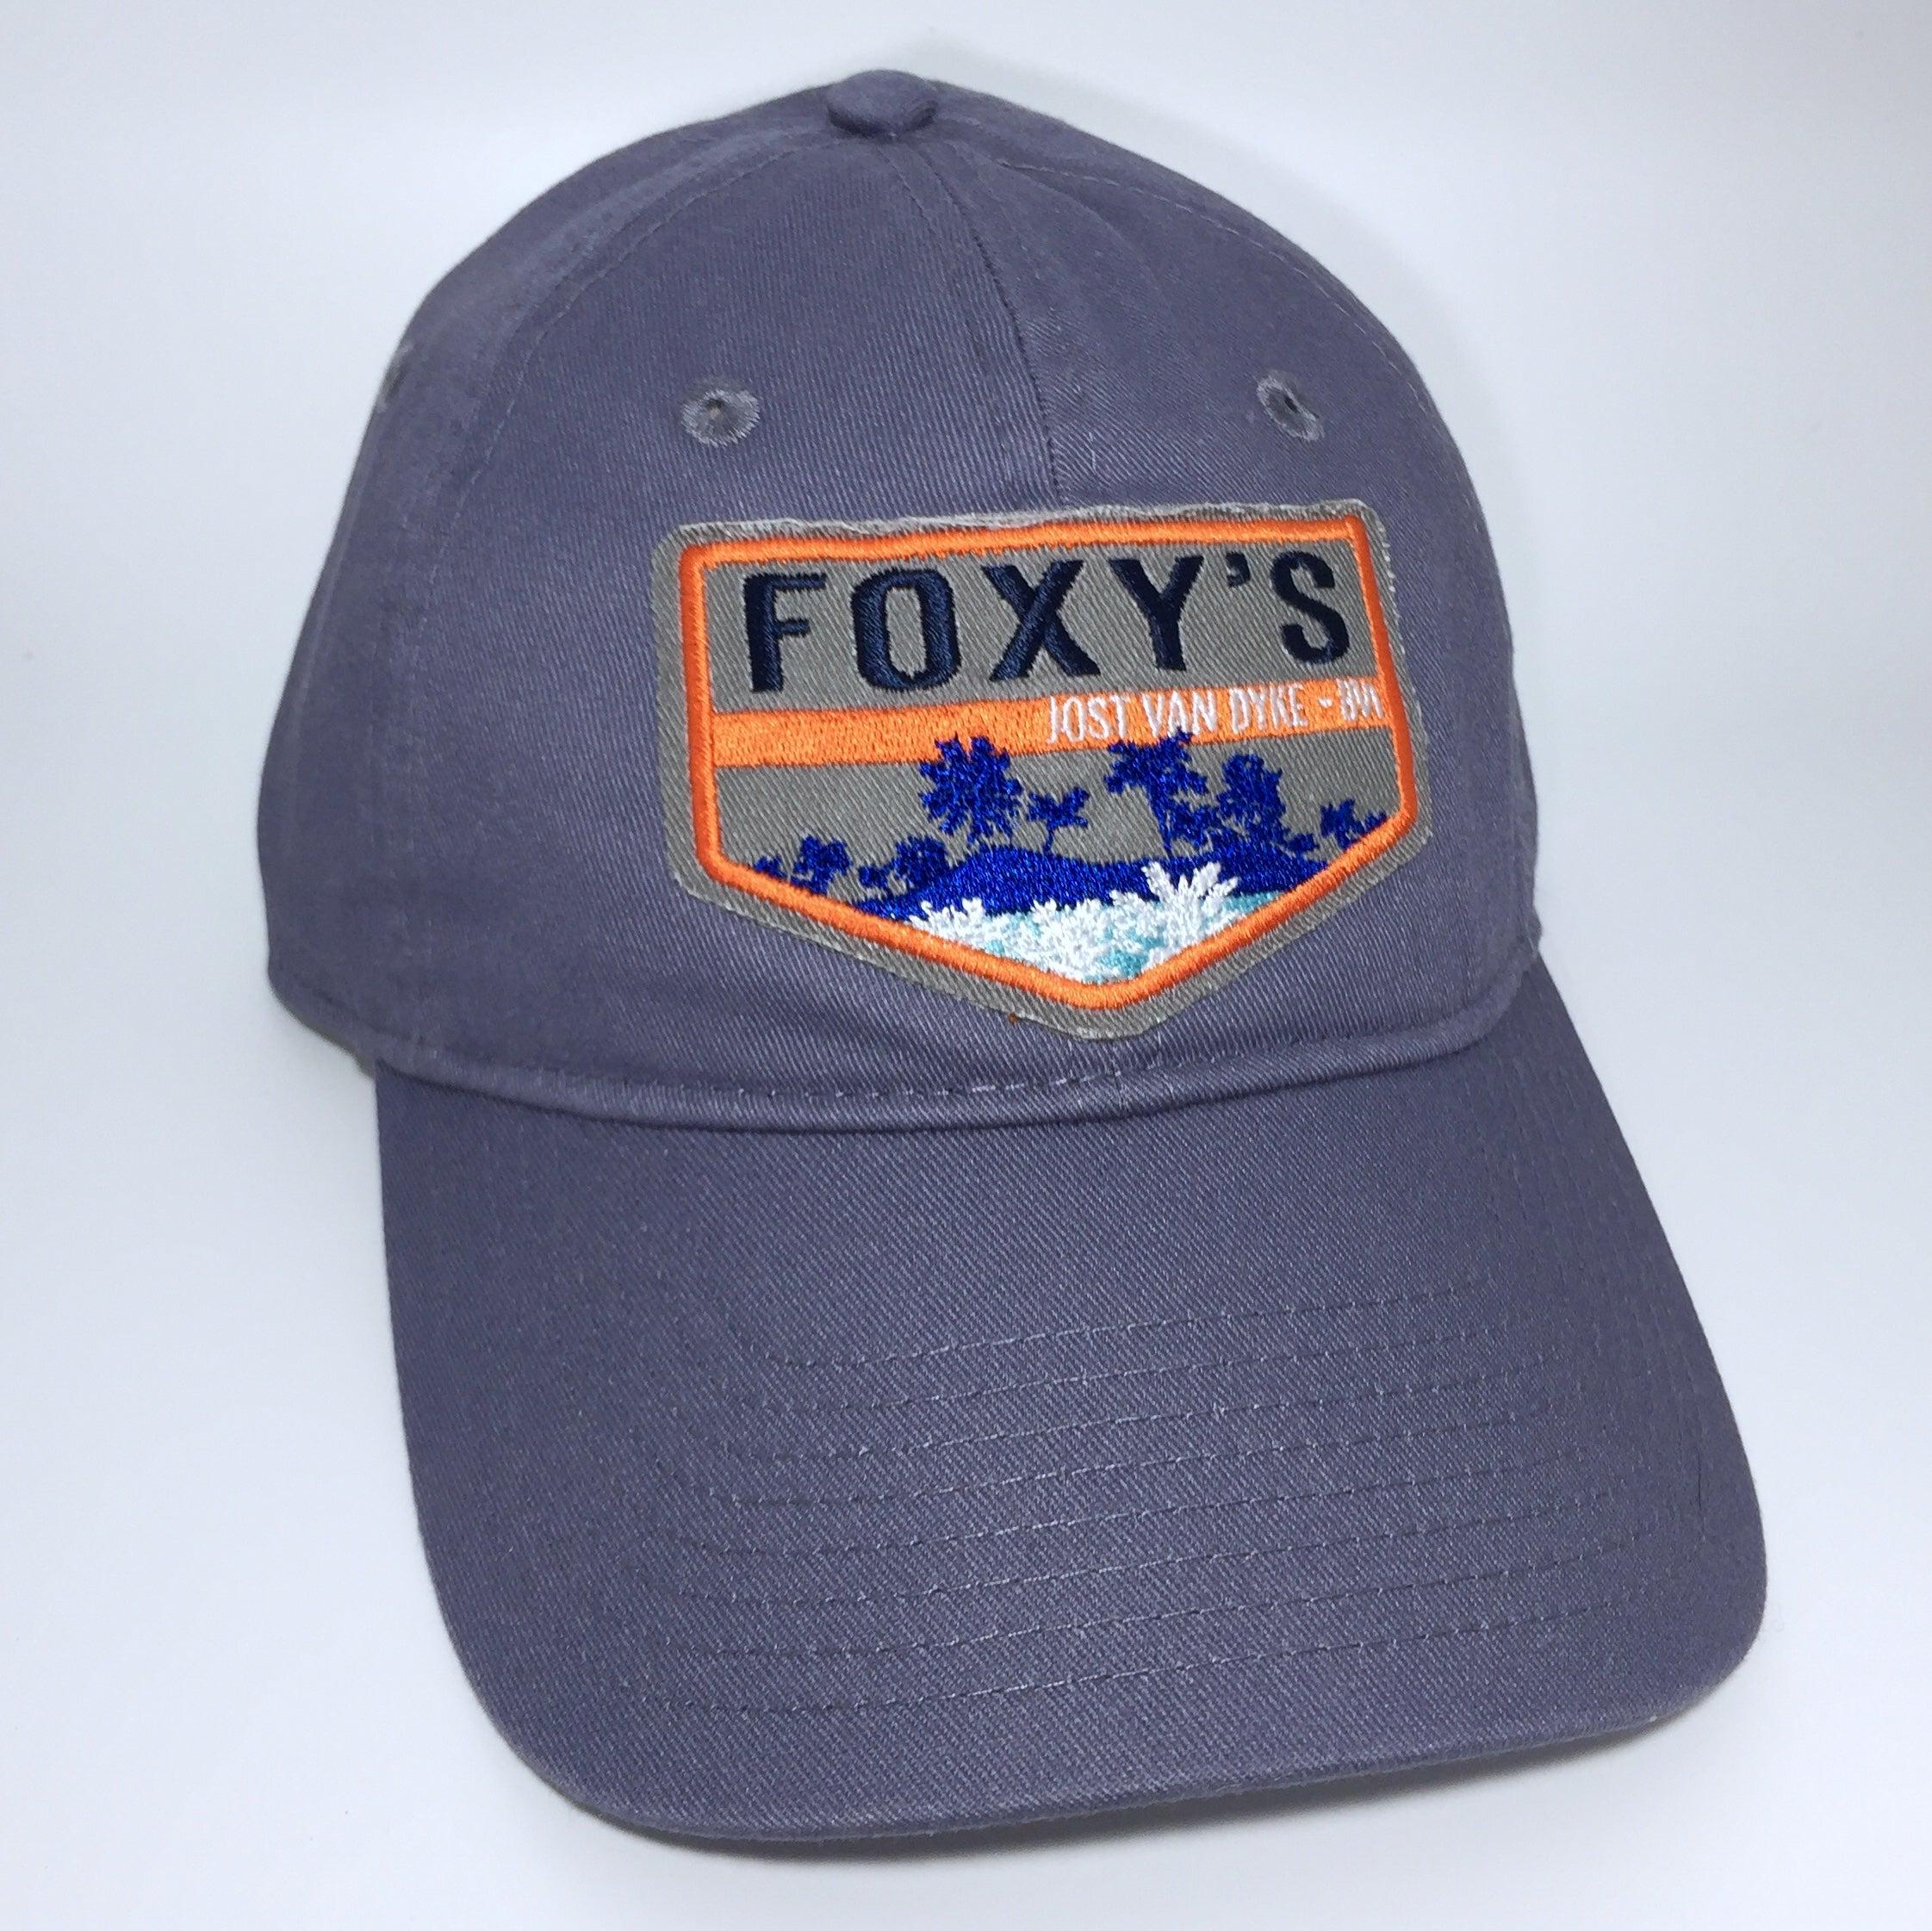 Foxy's 'Live de Life' Palm Island Cap- Available in 4 colors